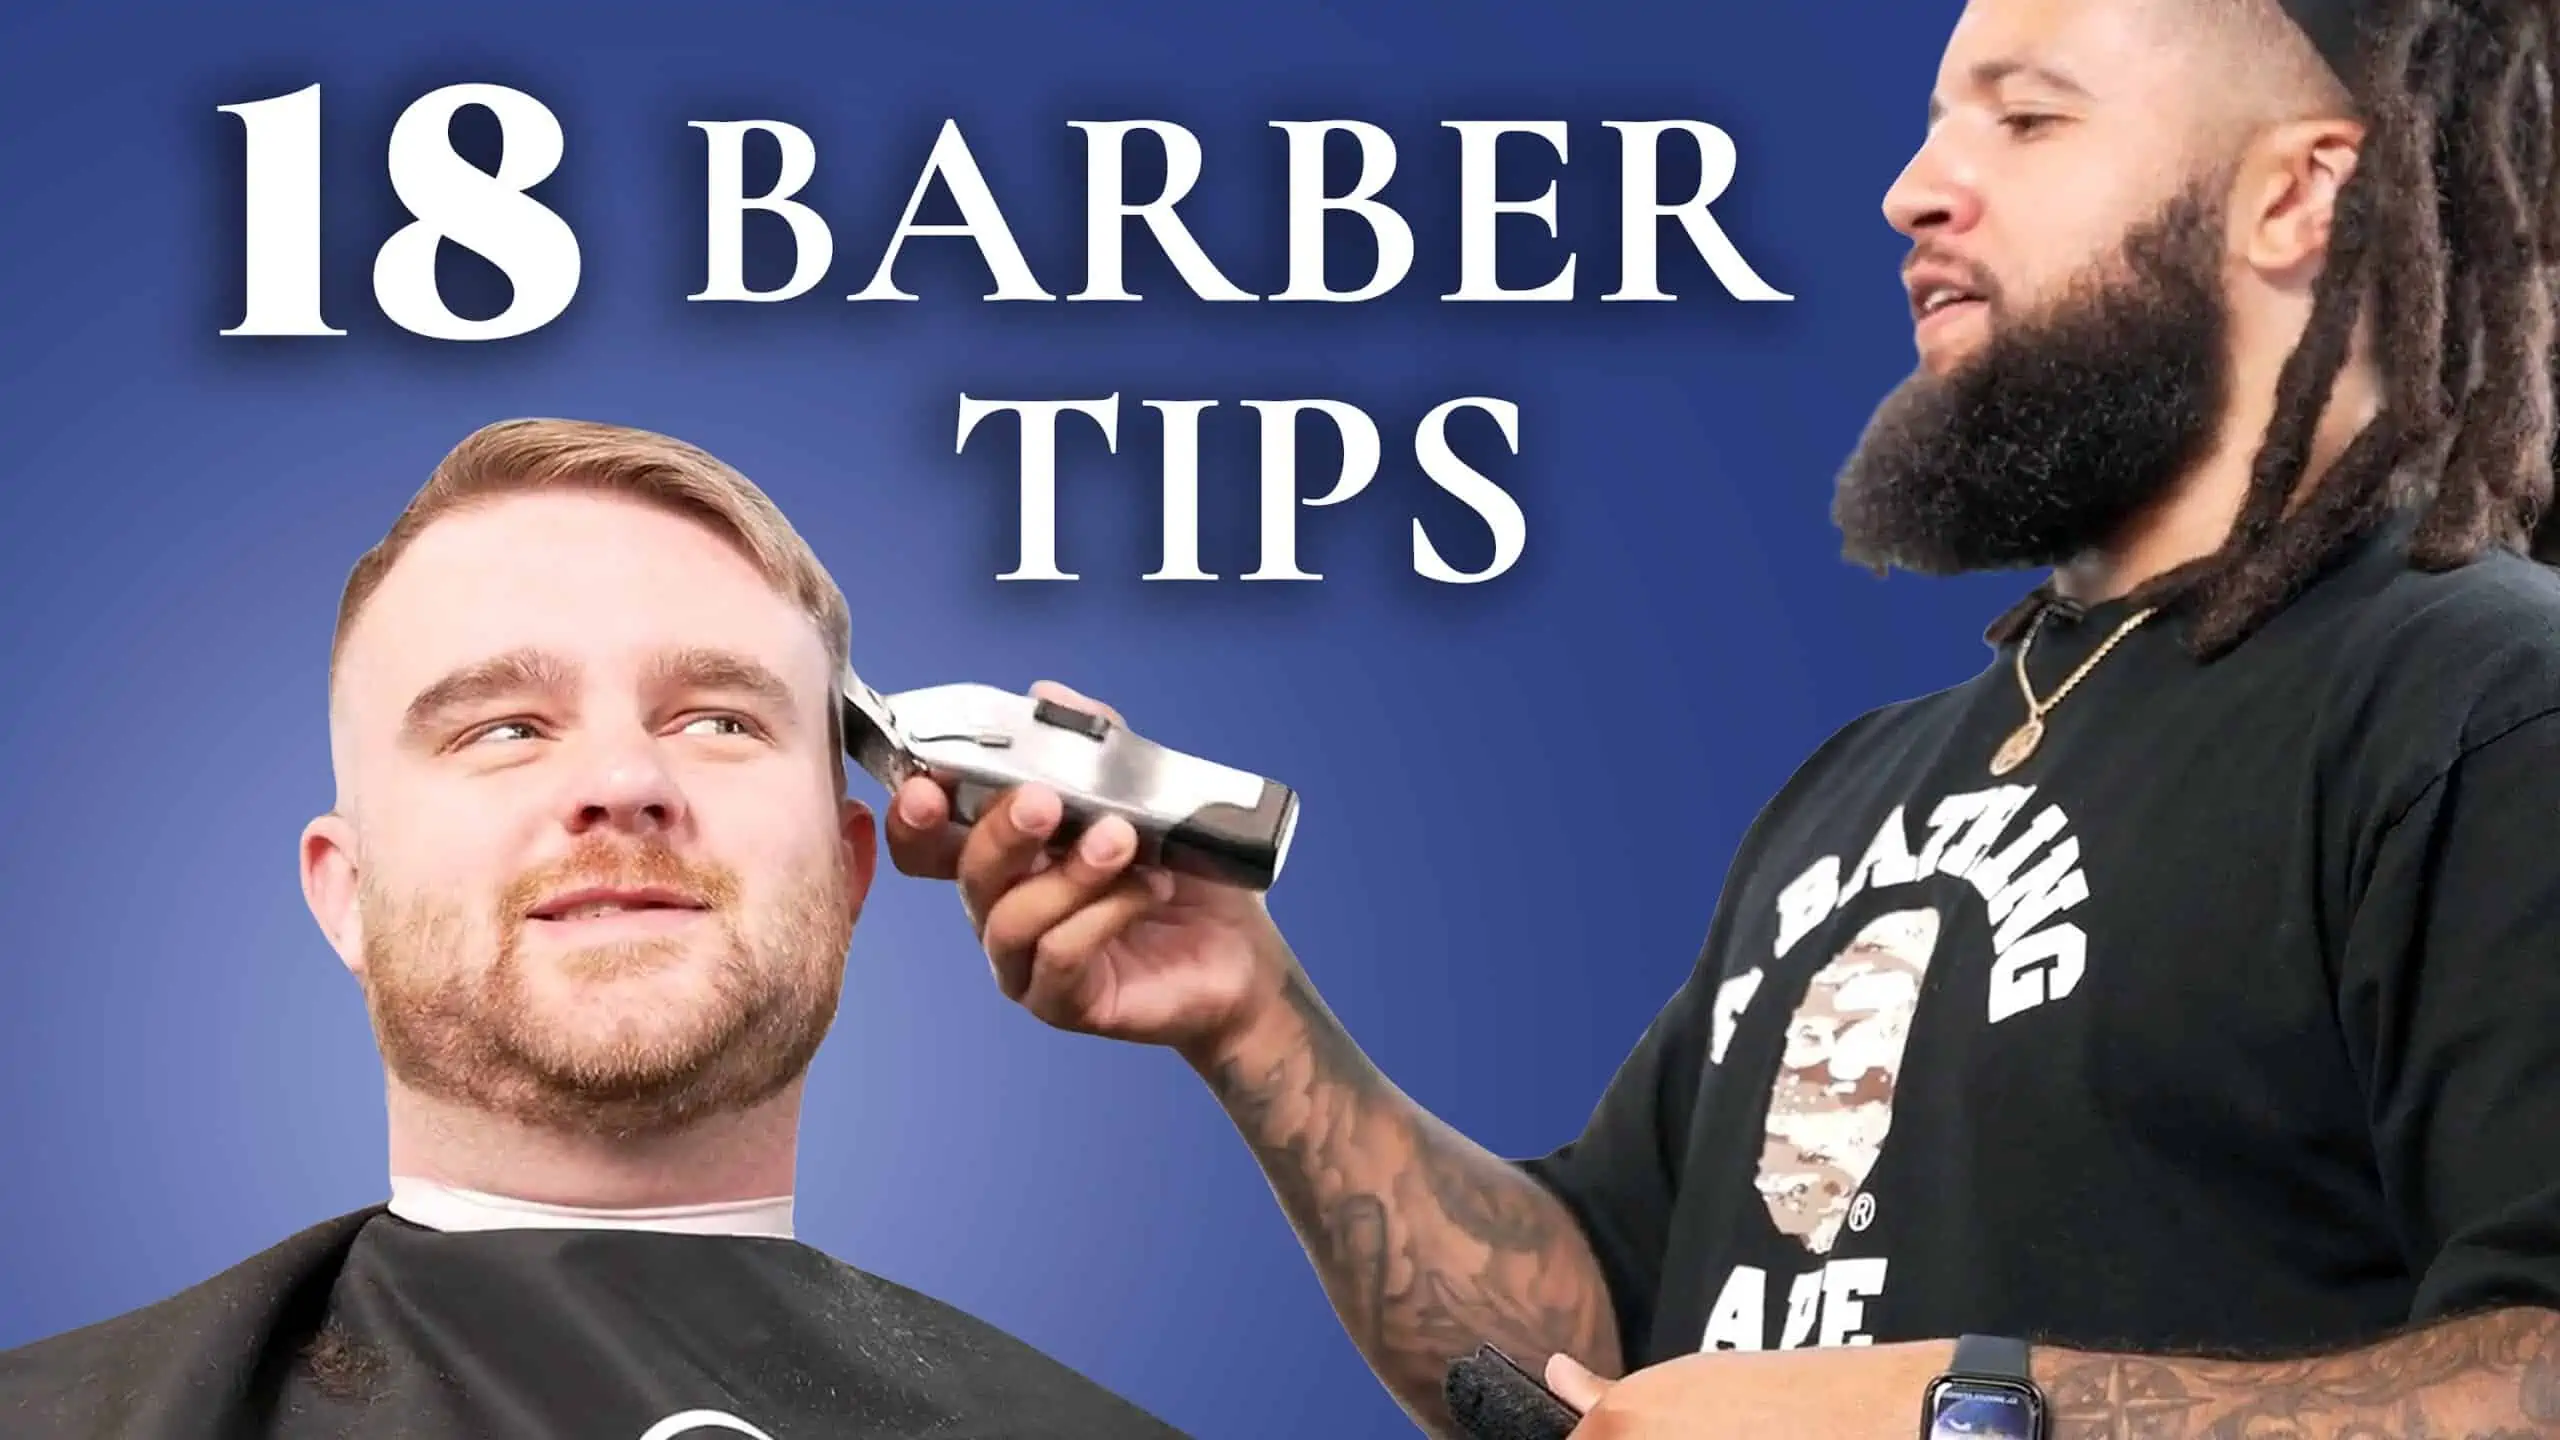 18 barber tips 3840x2160 scaled